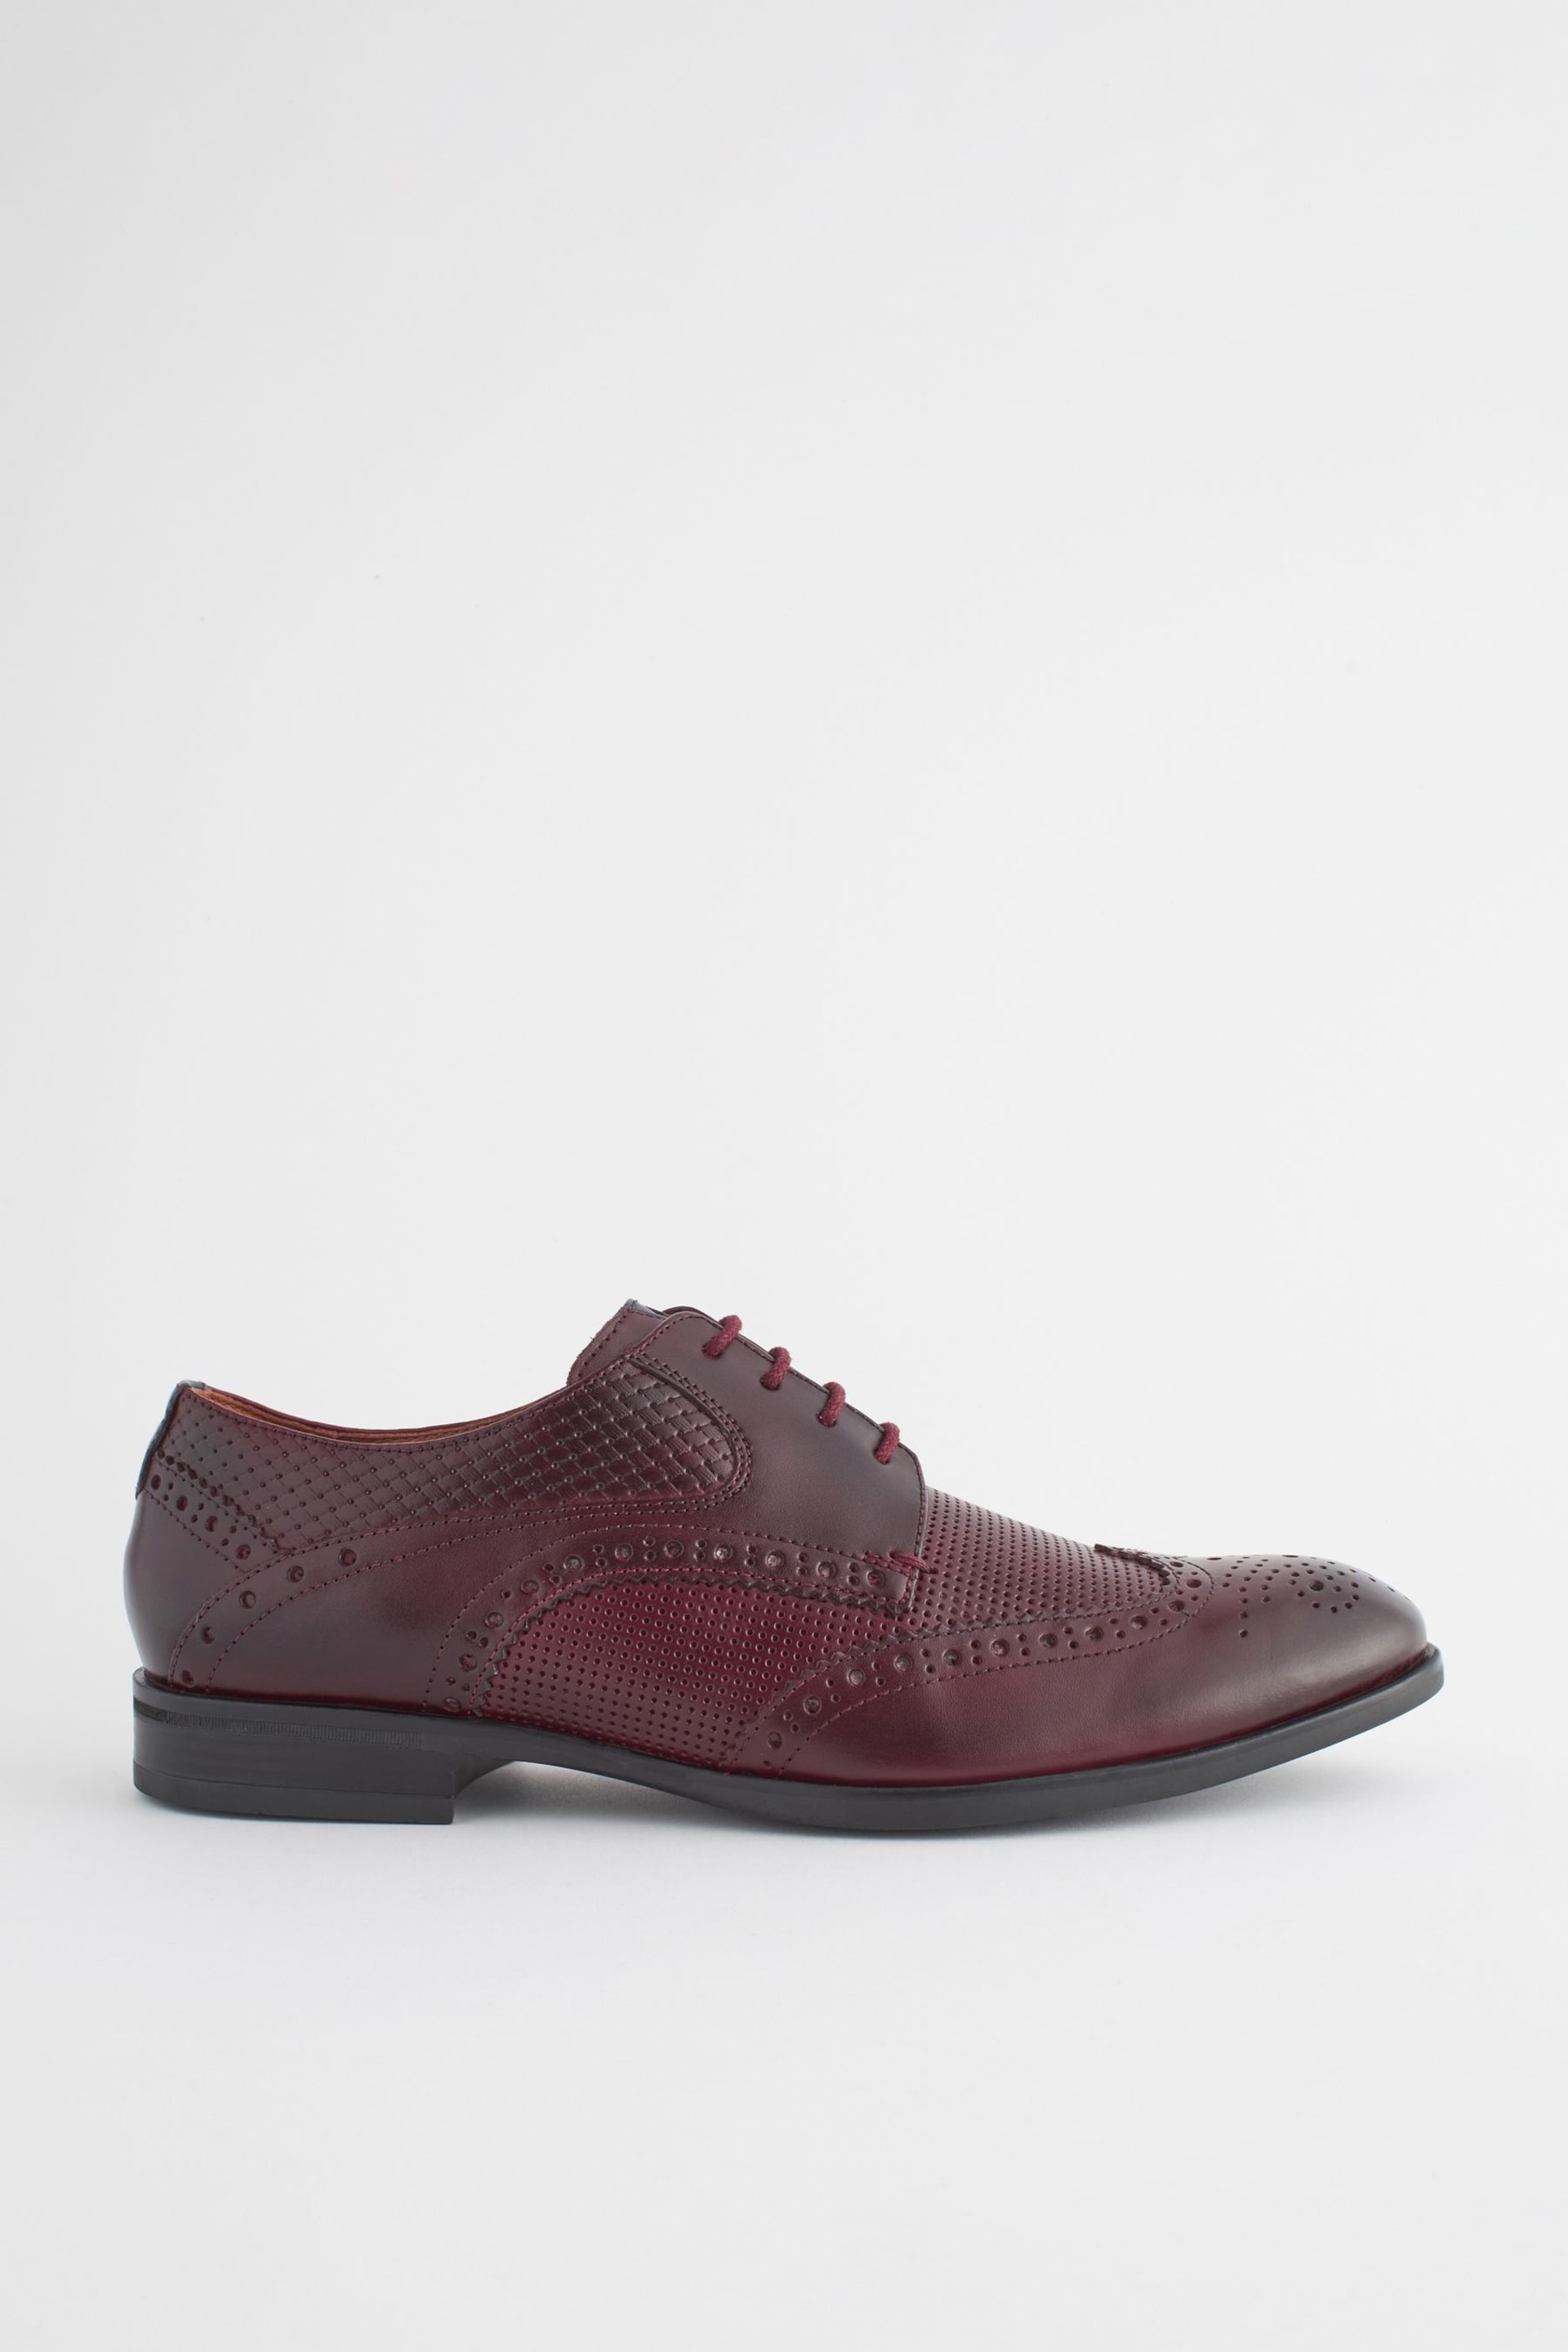 Burgundy Red Leather Embossed Wing Cap Brogues Shoes - Image 2 of 8